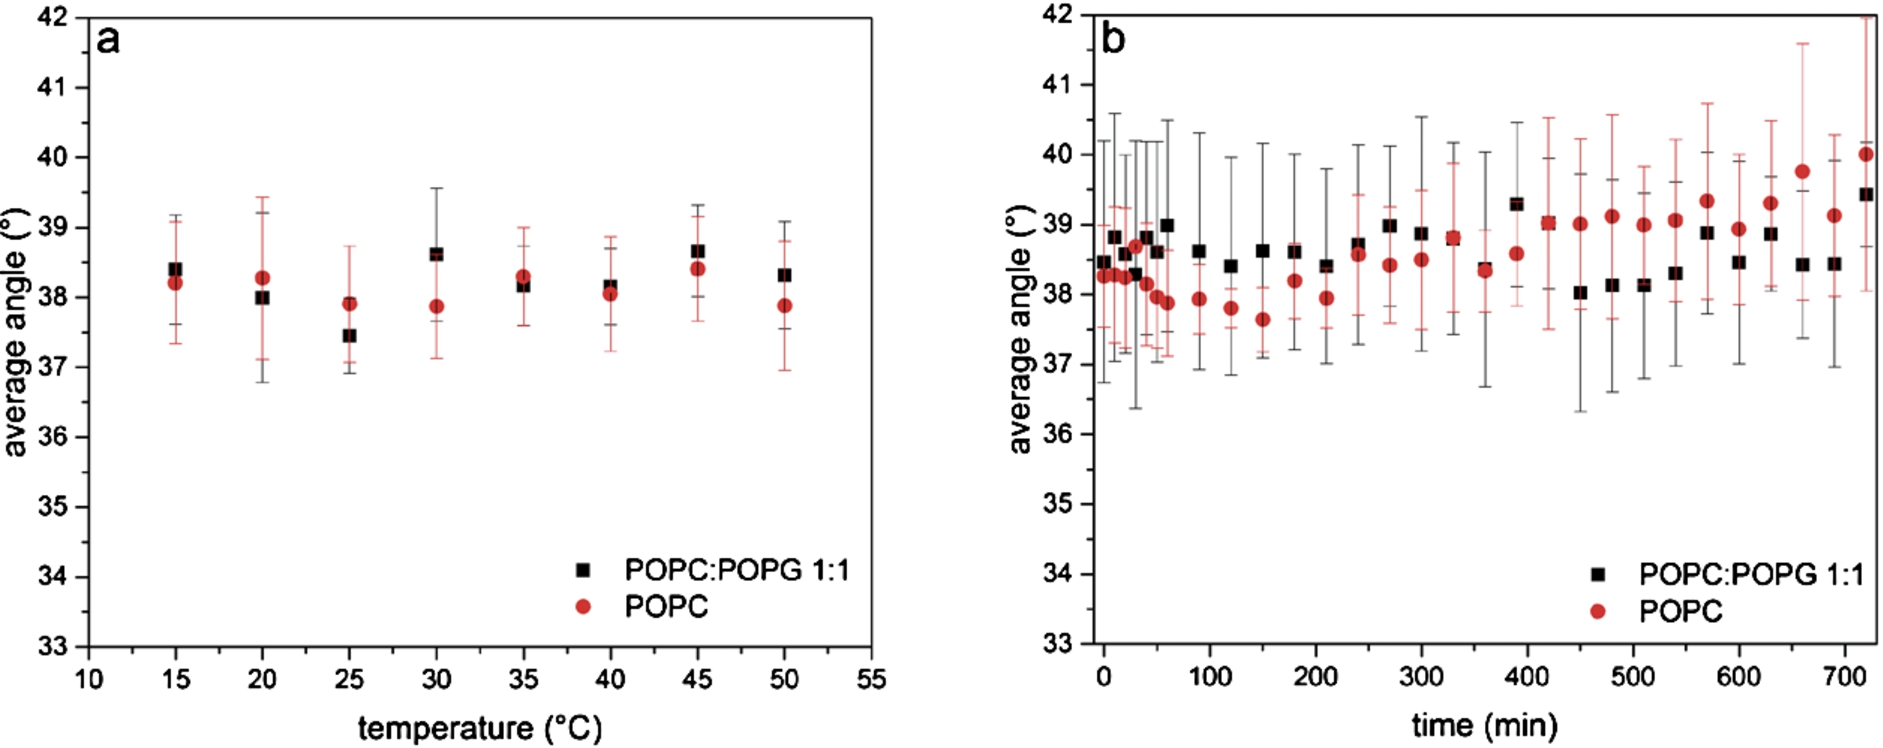 Stability of SSLBs at different temperatures and over time. The orientation of the lipid alkyl chains with respect to the surface normal of a mixture of POPC and POPG (black squares) and of pure POPC (red circles) is shown (a) for different temperatures and (b) over 12 h at 25°C.